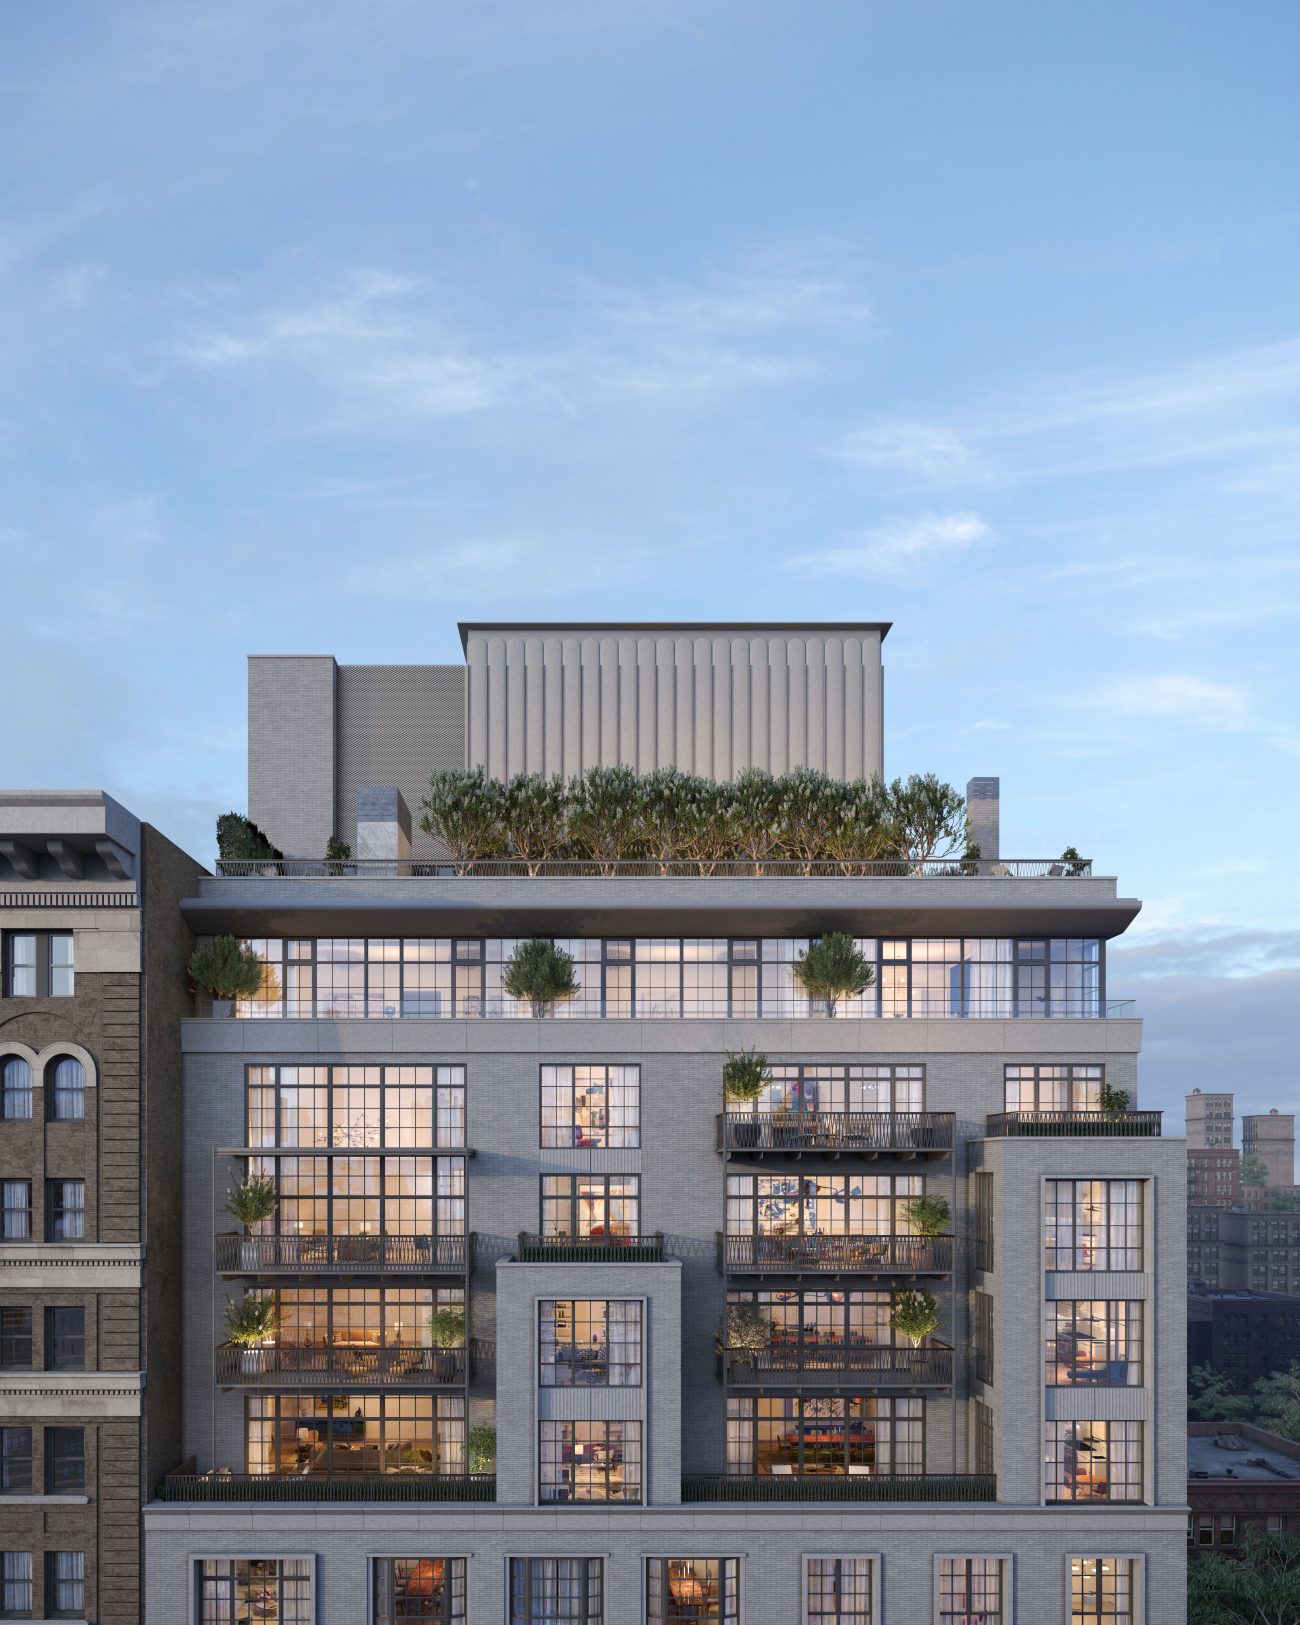 Crown at 109 East 79th Street. Rendered by Noë & Associates with The Boundary